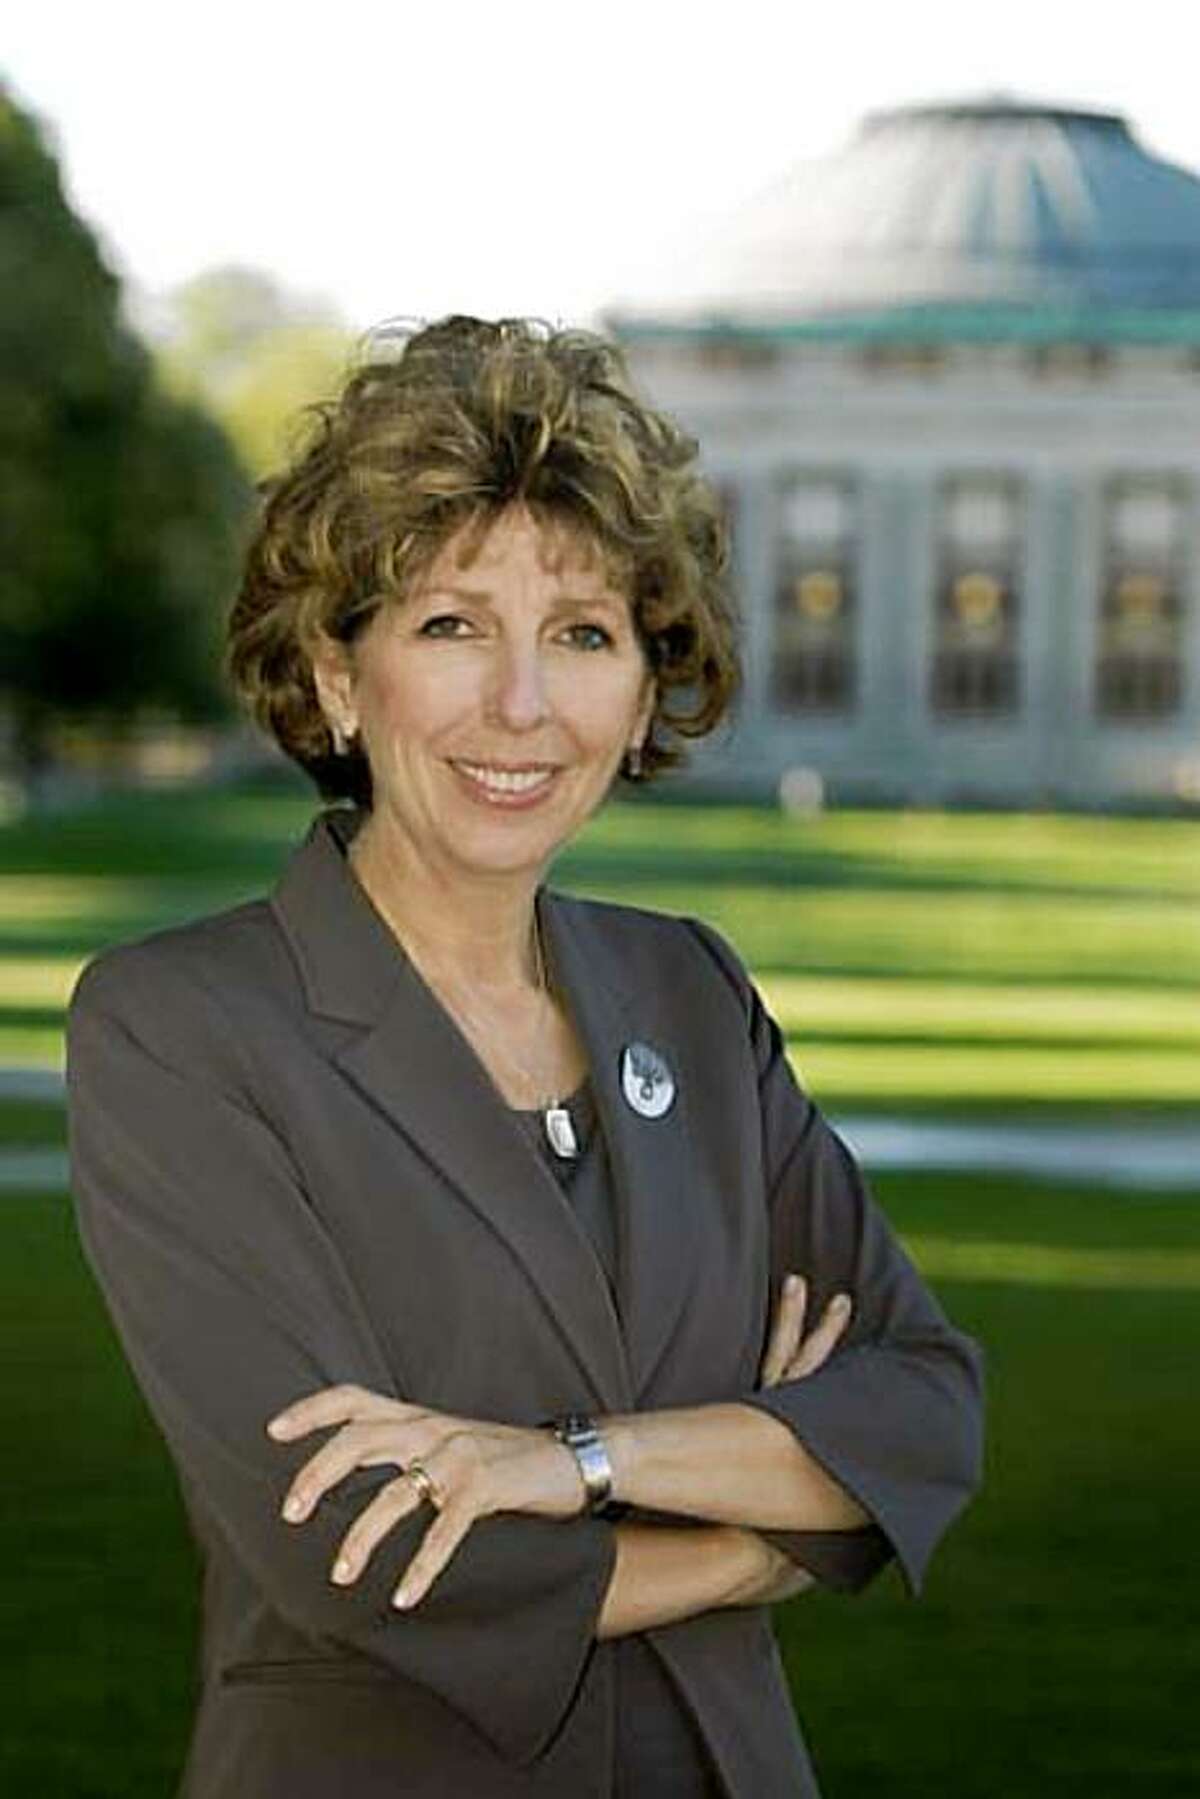 Linda Katehi Ð an accomplished professor of electrical and computer engineering and veteran of large public research institutions who serves as provost of the University of Illinois at Urbana-Champaign has been hired to become chancellor of UC Davis. Katehi would replace Larry Vanderhoef, who will have served 15 years as UC Davis chancellor when he steps down this summer.